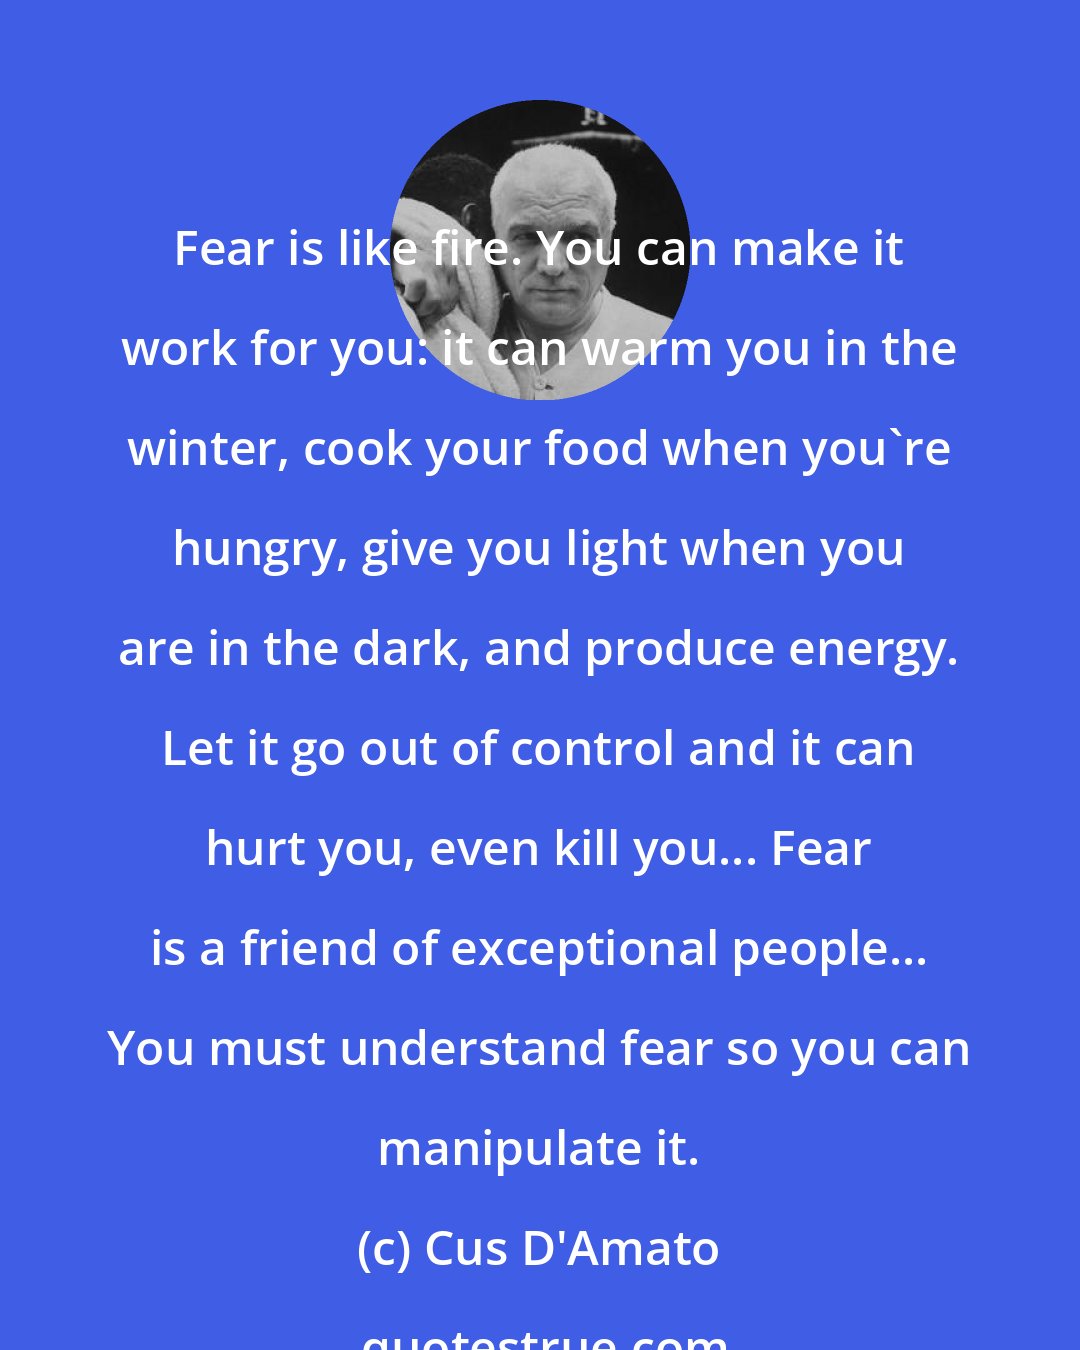 Cus D'Amato: Fear is like fire. You can make it work for you: it can warm you in the winter, cook your food when you're hungry, give you light when you are in the dark, and produce energy. Let it go out of control and it can hurt you, even kill you... Fear is a friend of exceptional people... You must understand fear so you can manipulate it.